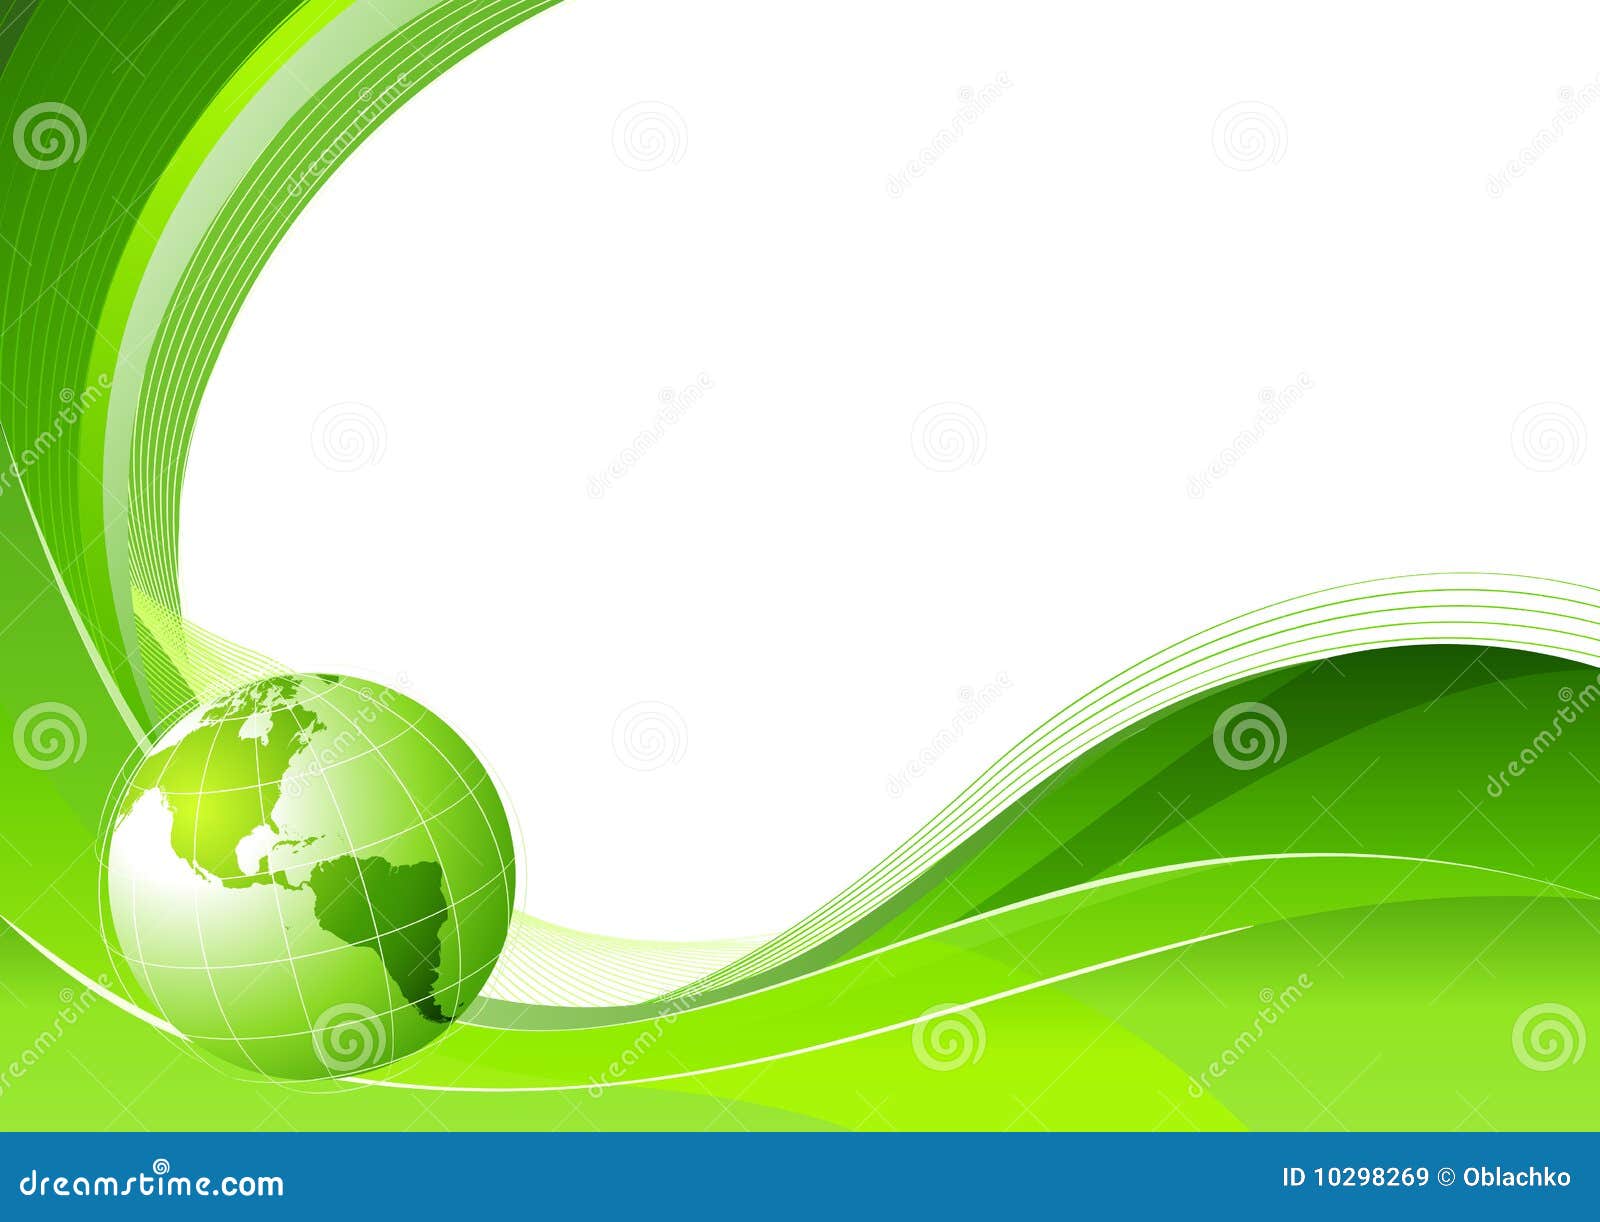 Green Abstract Lines Background Stock Vector - Illustration of ...